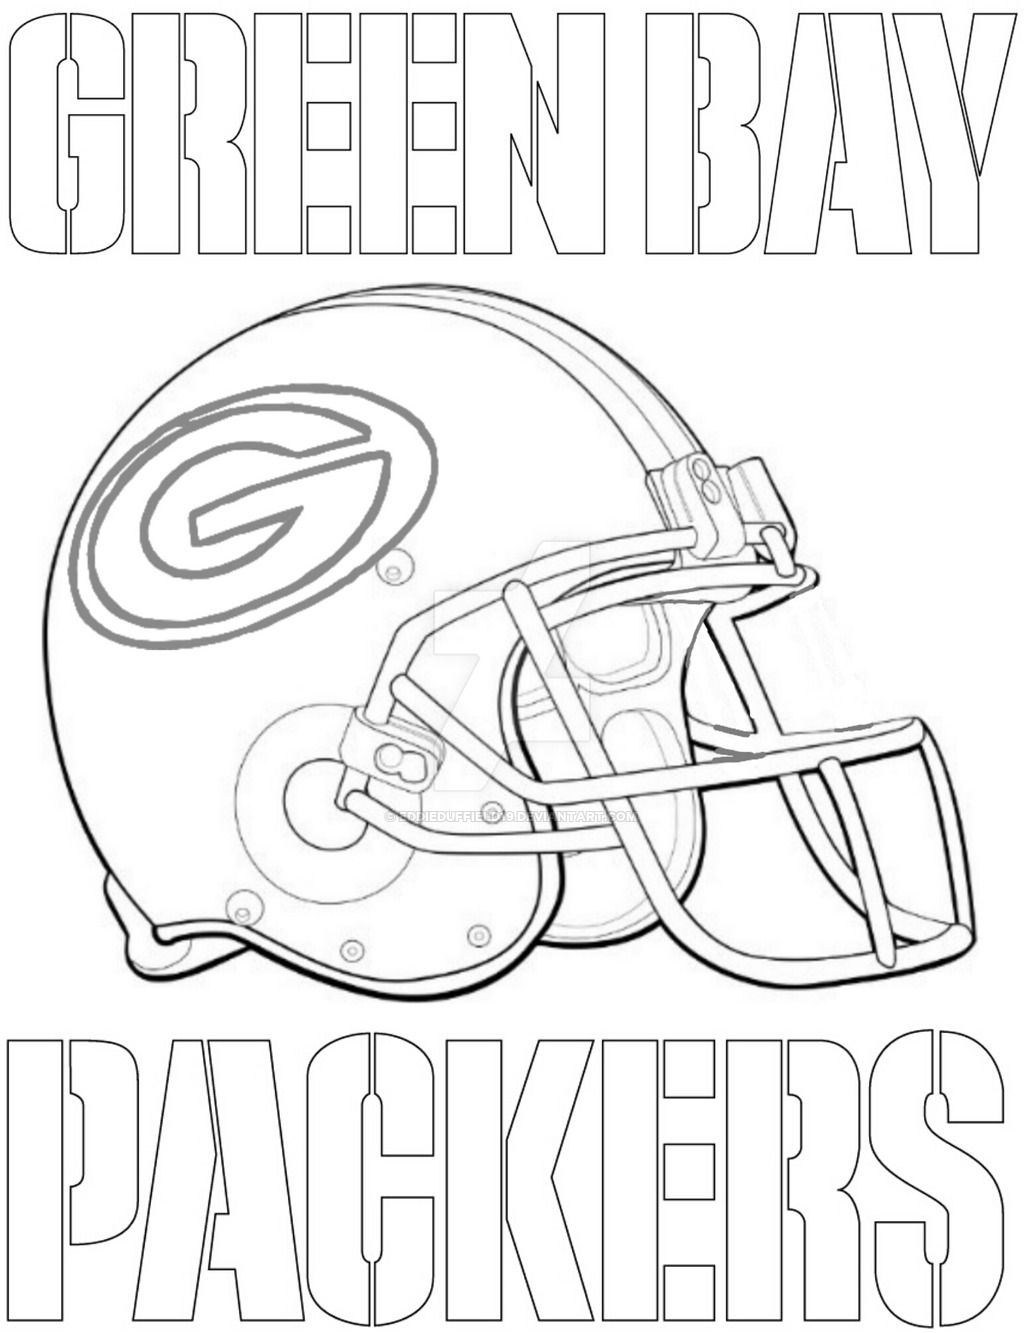 packers football coloring pages - photo #2